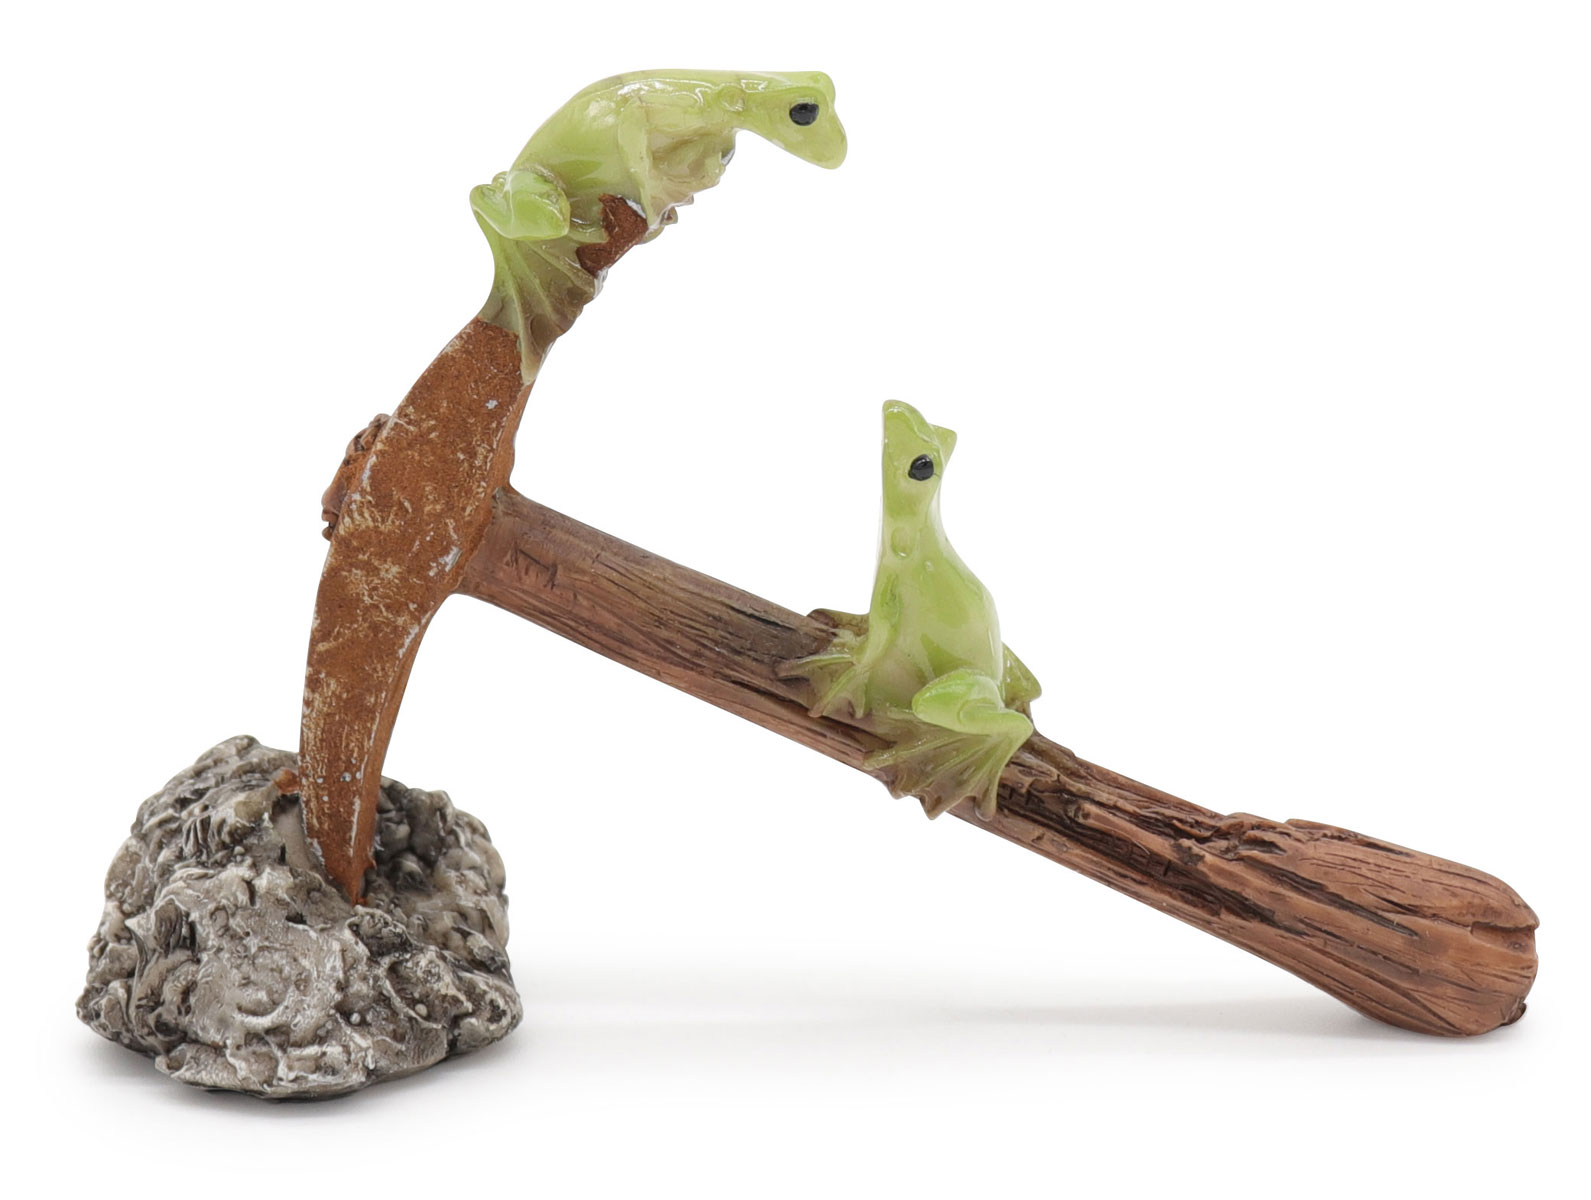 Pair of frogs Elfriede & Erwin on pickaxe, 